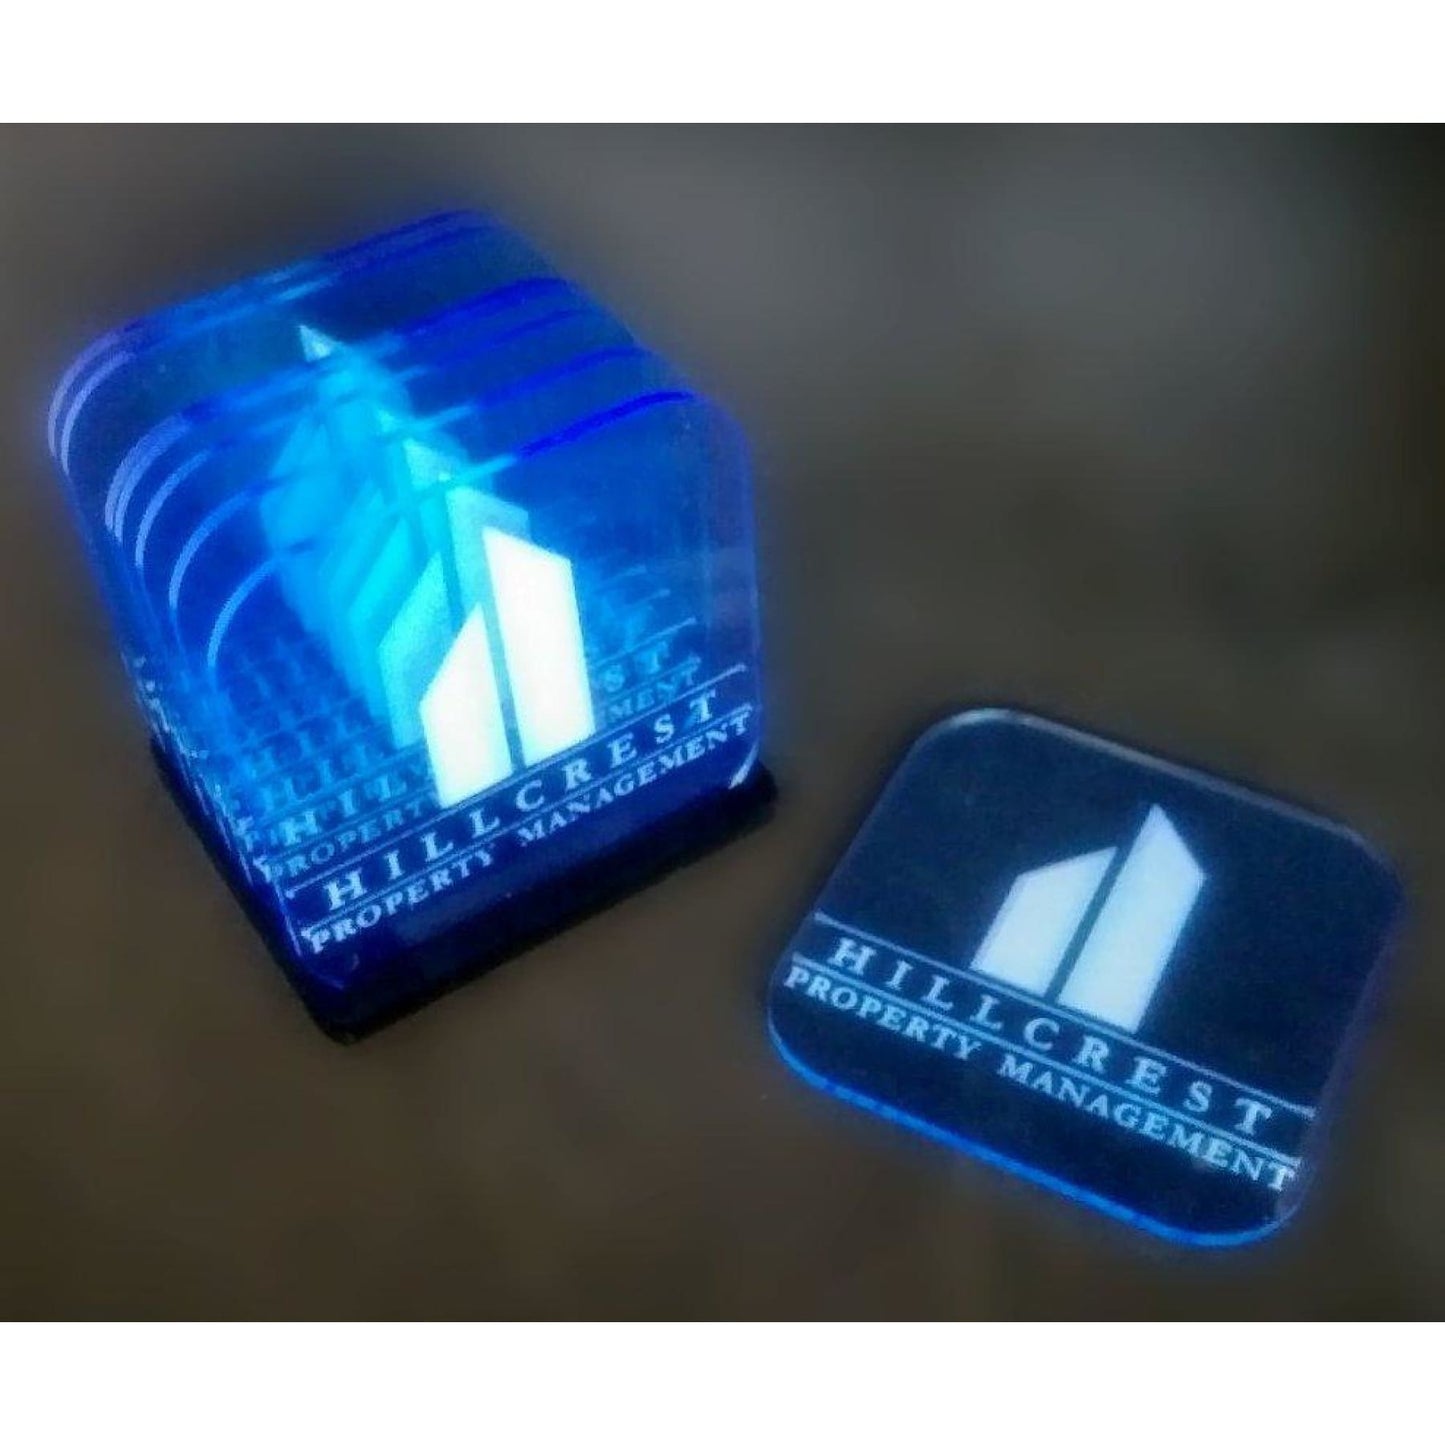 New product: Branded acrylic coasters - Hotel Suppliers